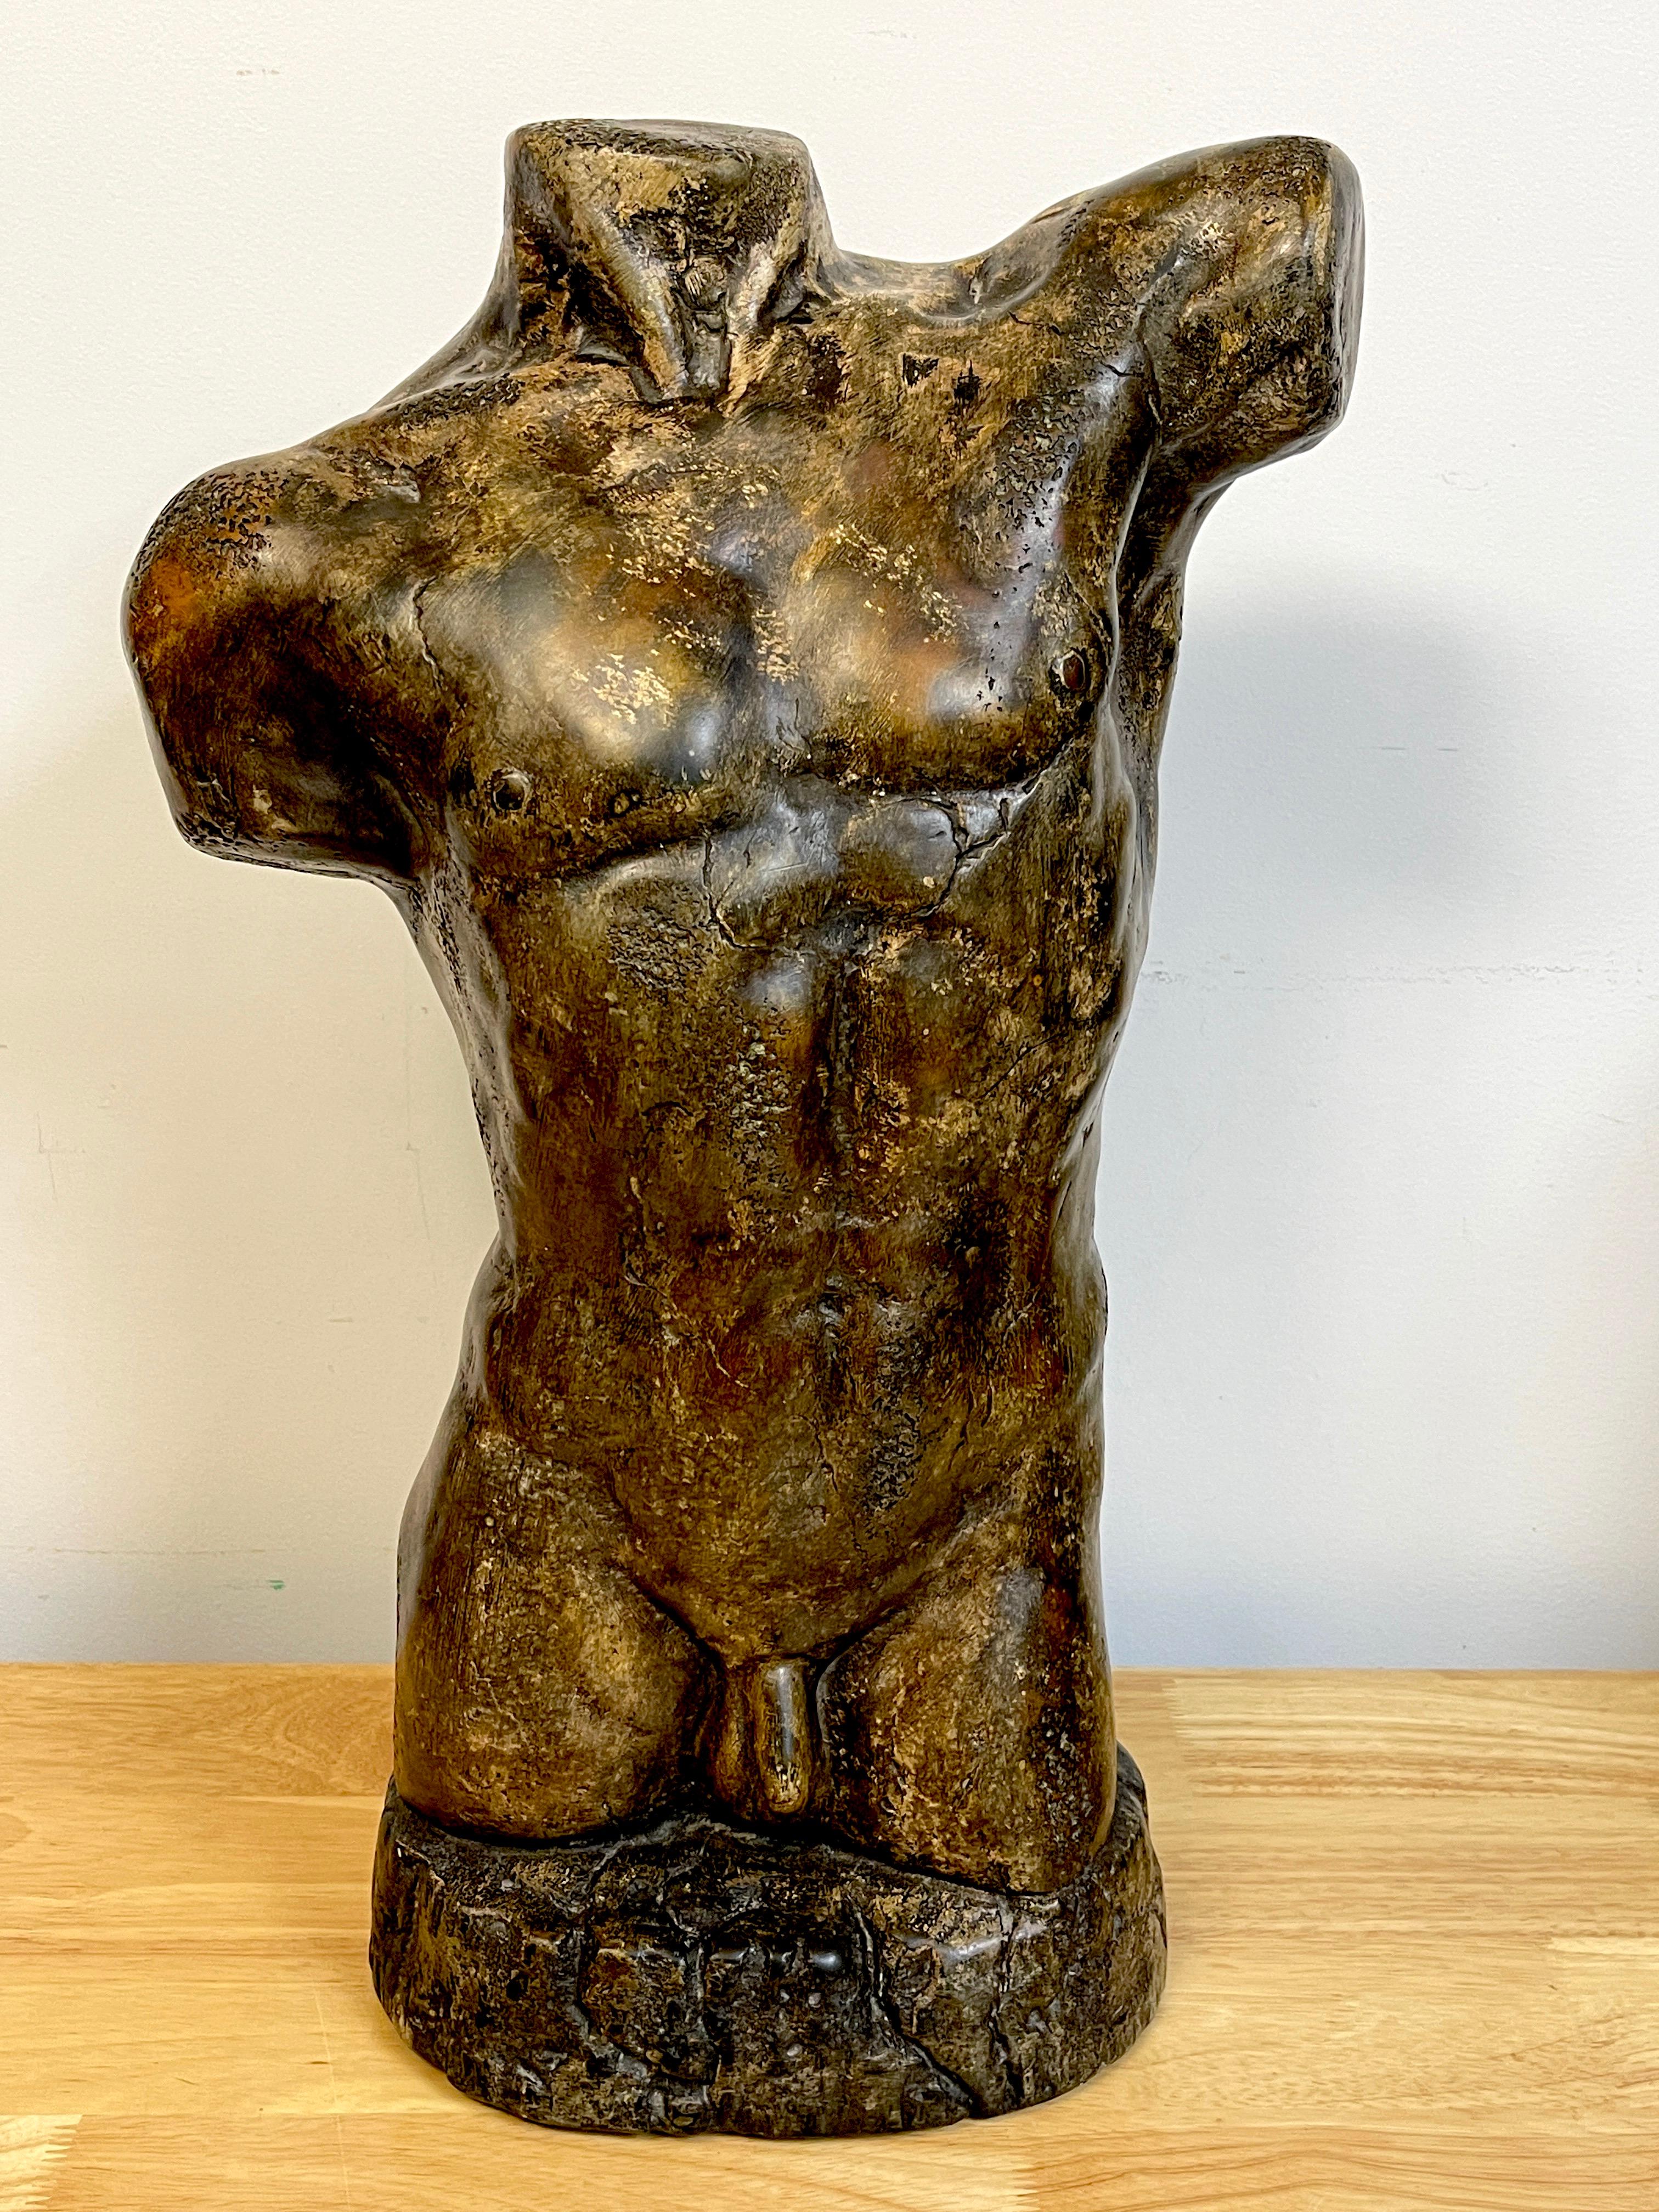 French modern bronzed plaster sculpture of a male nude torso, possibly a Maquette. Unsigned.
A bold, well modeled sculpture, with a beautiful patina and texture. Its a substantial work period work. 
The sculpture base measures Inches wide x